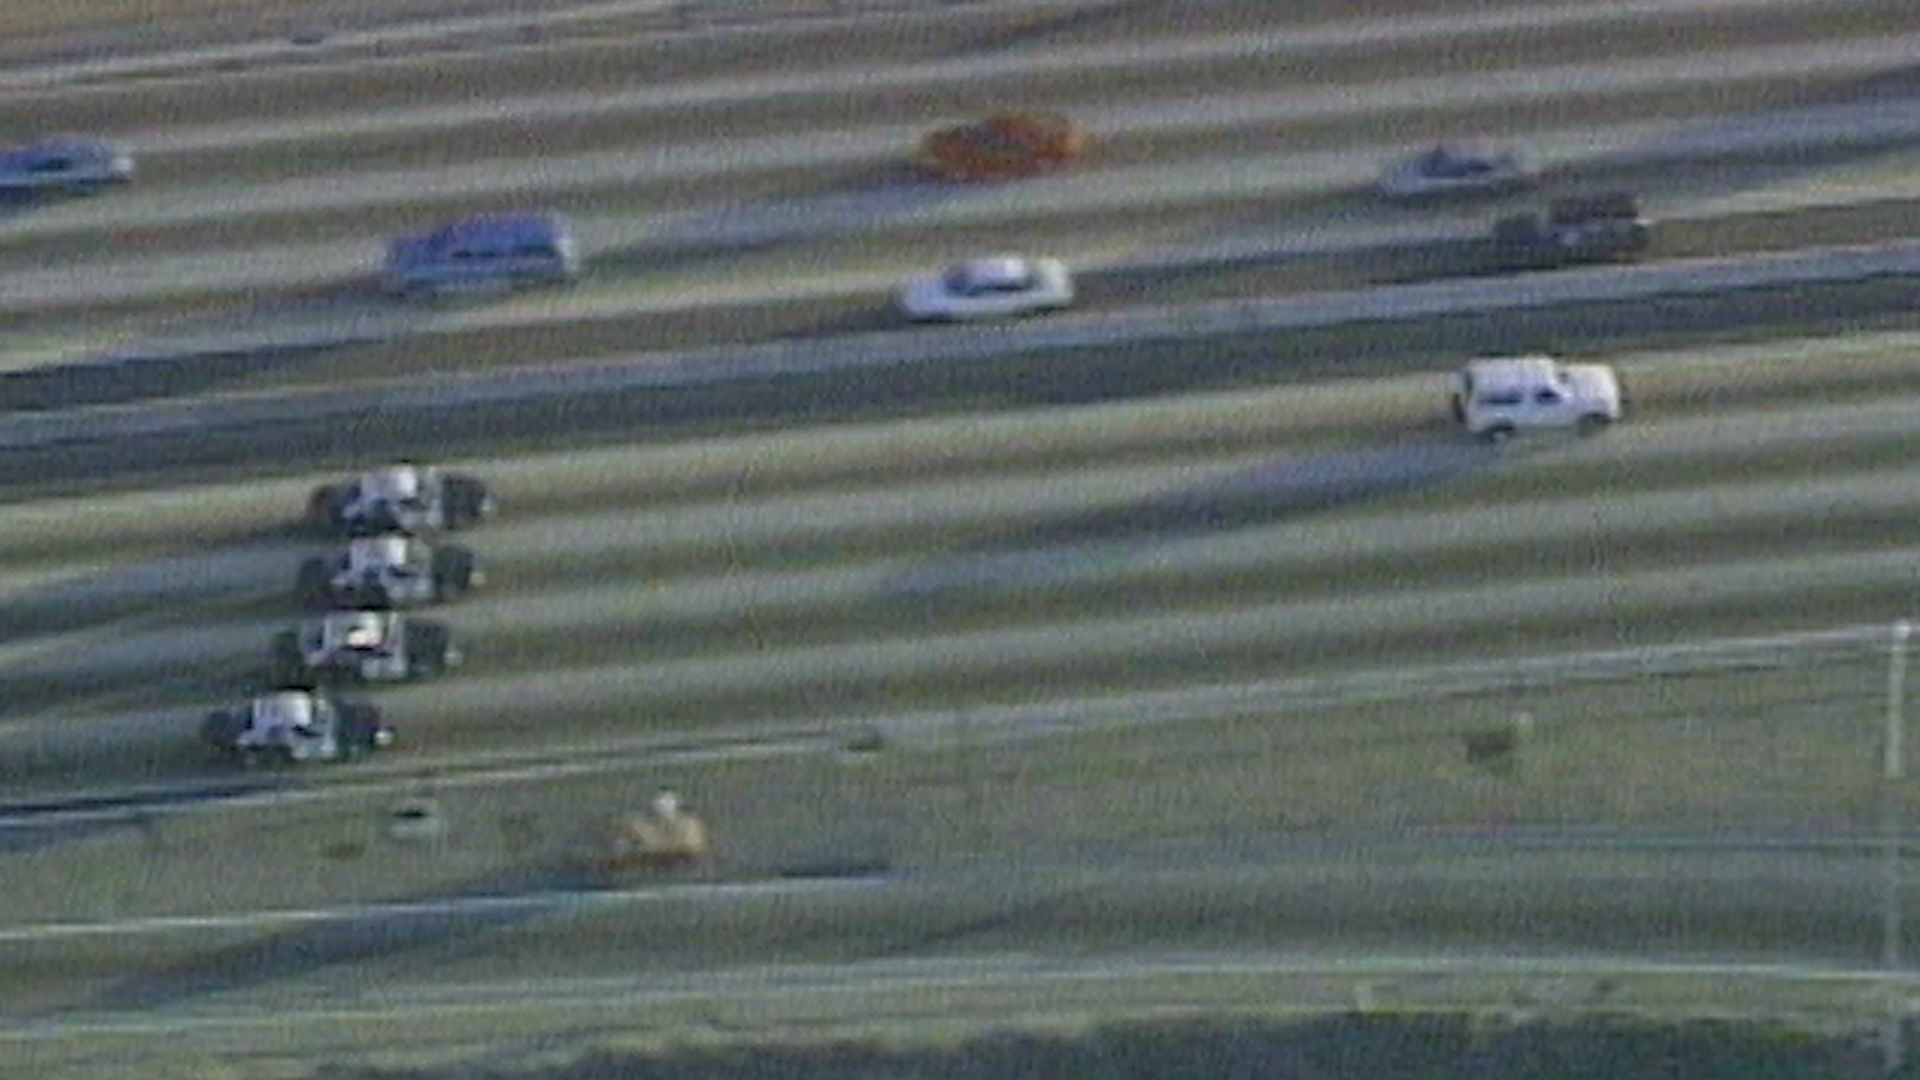 Watch OJ Simpsons infamous car chase that stopped the world (Video)